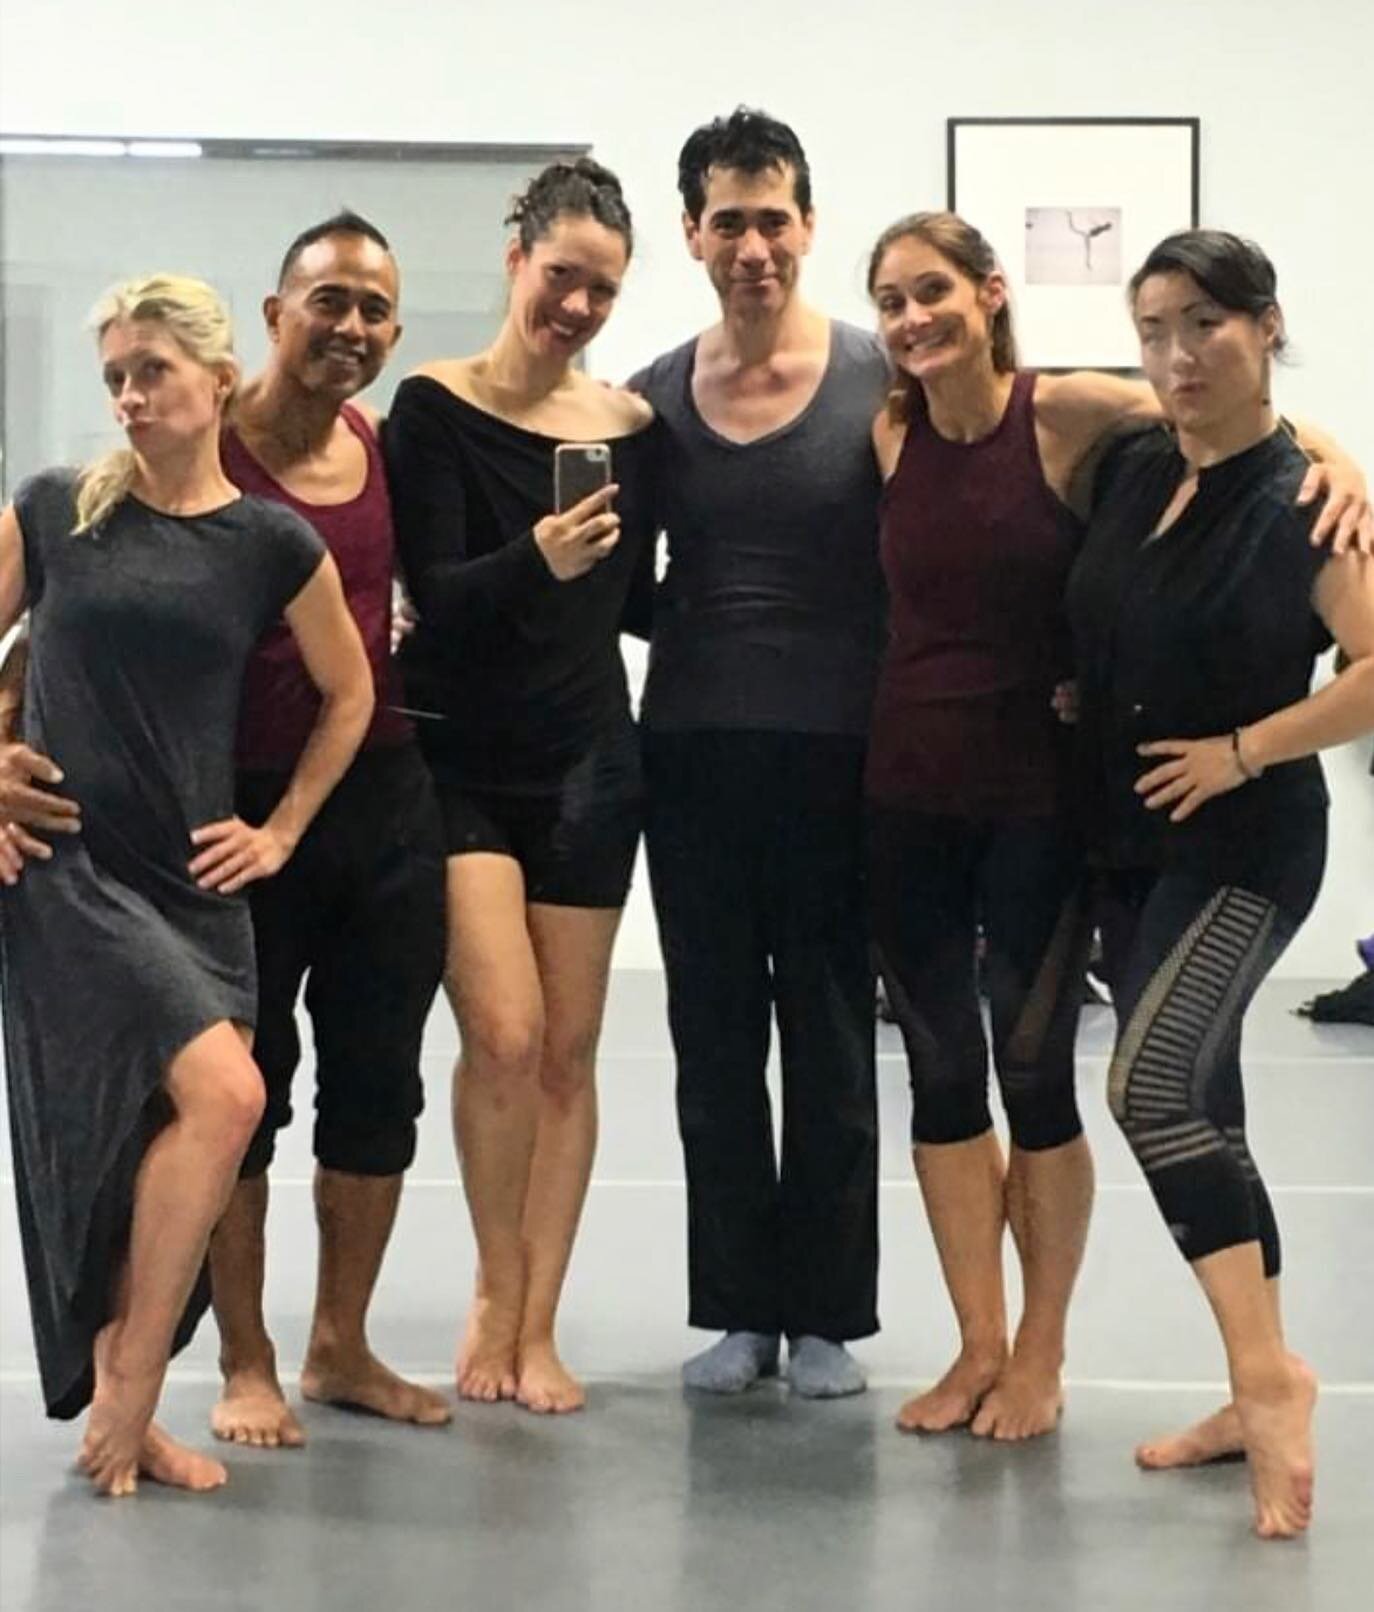 Memories... Company Rehearsal for Blakeley White Mcguire&rsquo;s piece 🎉We wish Pablo &amp;E.E 🎂happy birthday this coming week!  @franksisco49 &amp; @eesential 
.
#cltartist #nycartist #dance #movementmigration
📍 @opendoorstudios #clt #nc